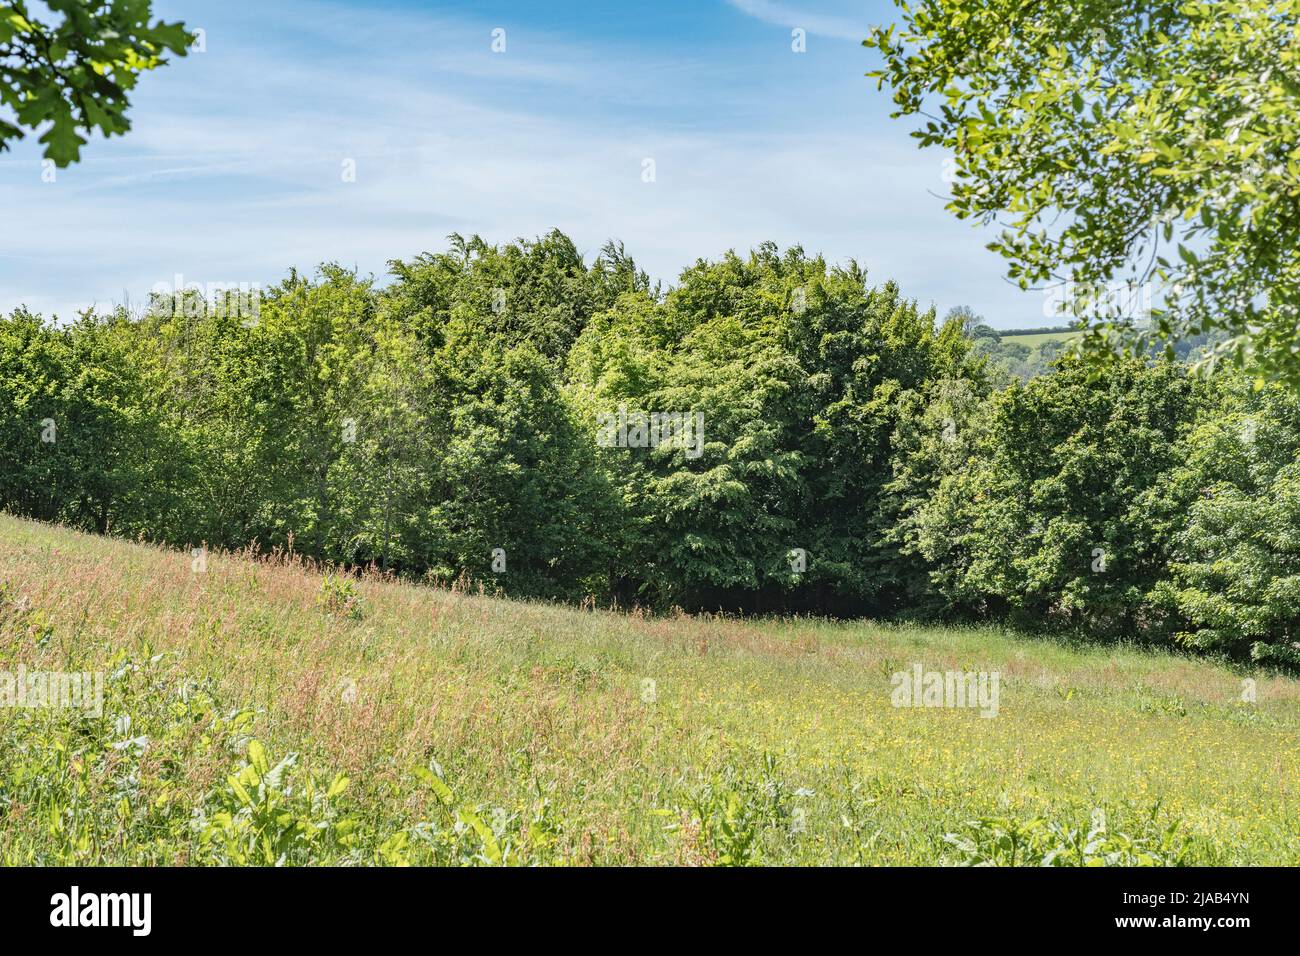 UK pasture field, grazing or hay field in early summer sun. Focus on treeline and horizon of grass. For UK farming and agriculture, agricultural weeds Stock Photo